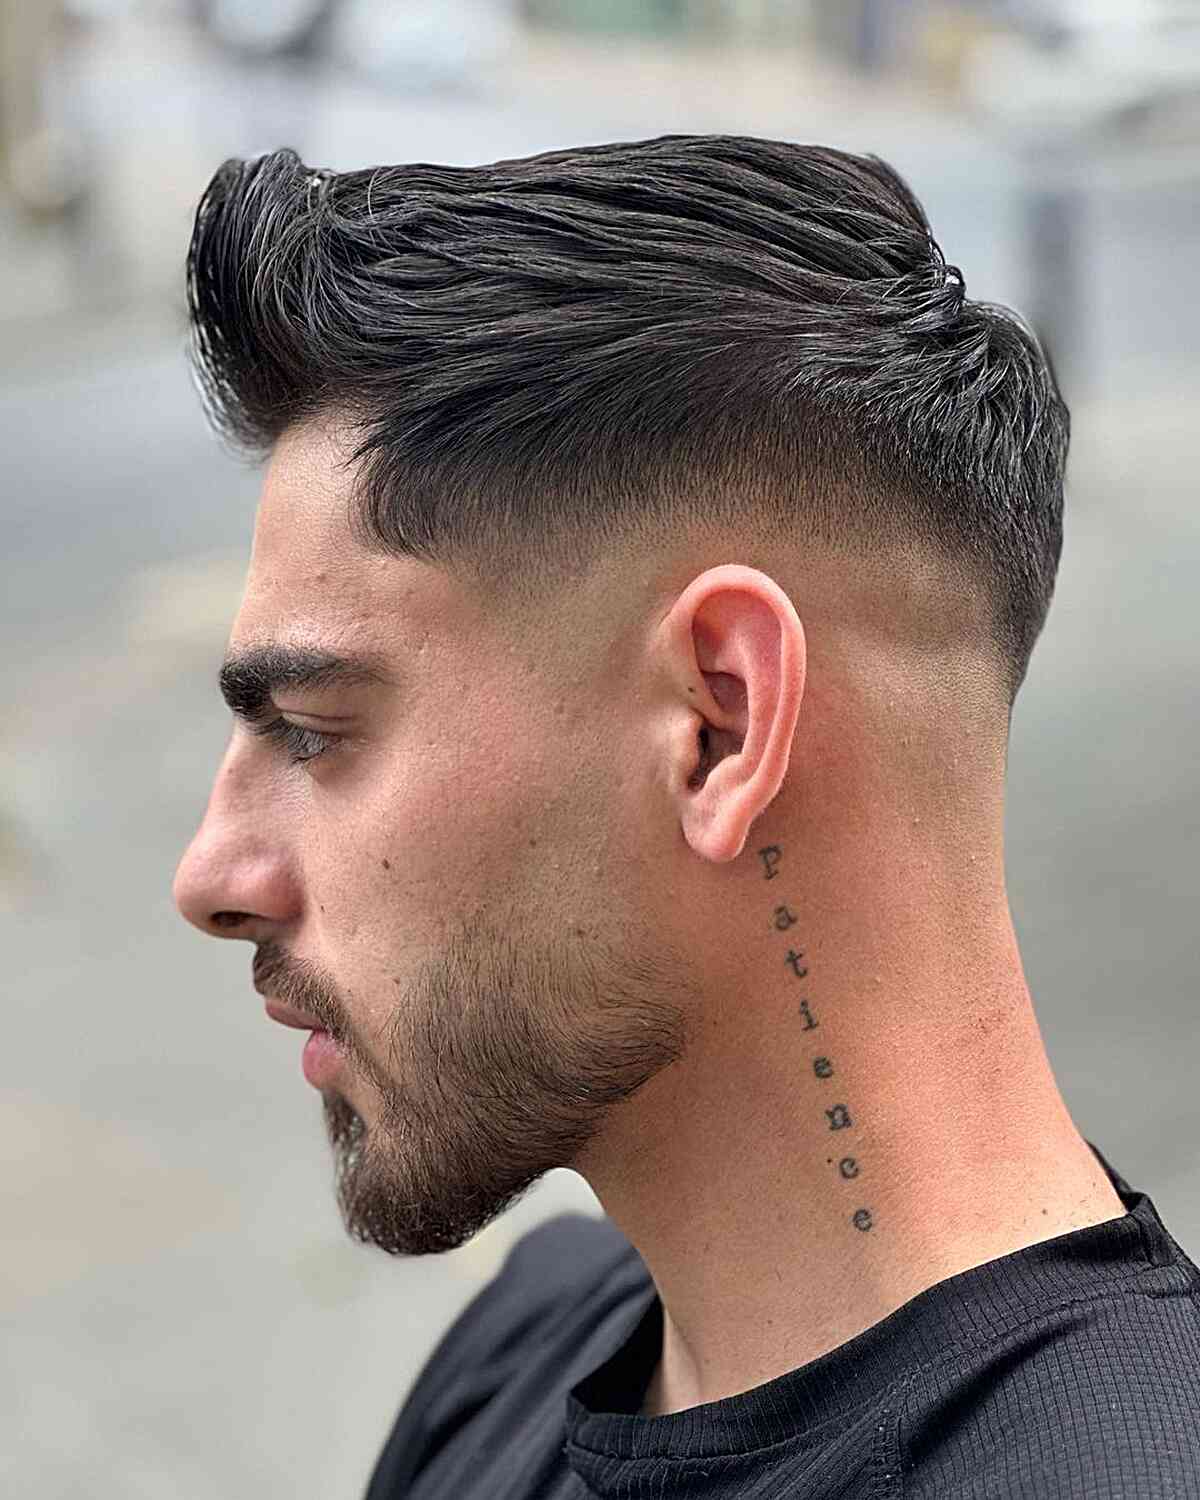 How to create quiff hairstyle to look epic